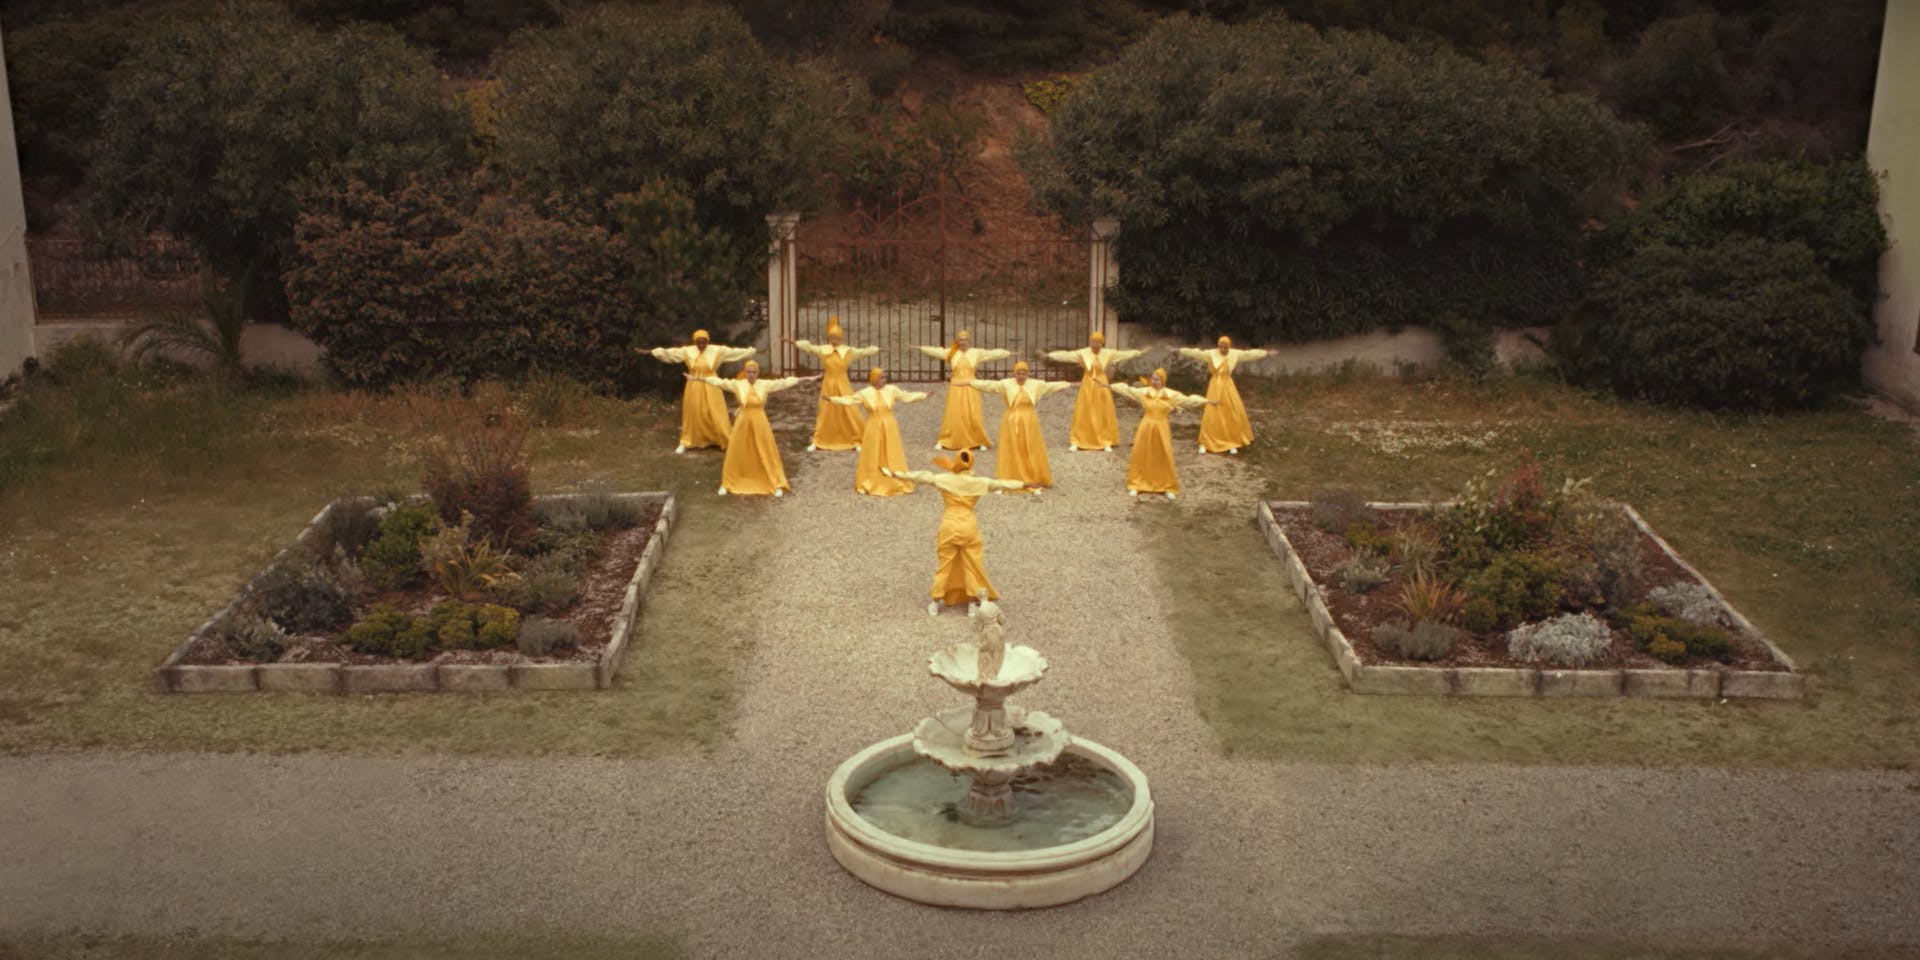 Still from Bumble's campaign advert showing a group of women in long yellow costumes with their arms outstretched in unison while standing in a garden next to a fountain